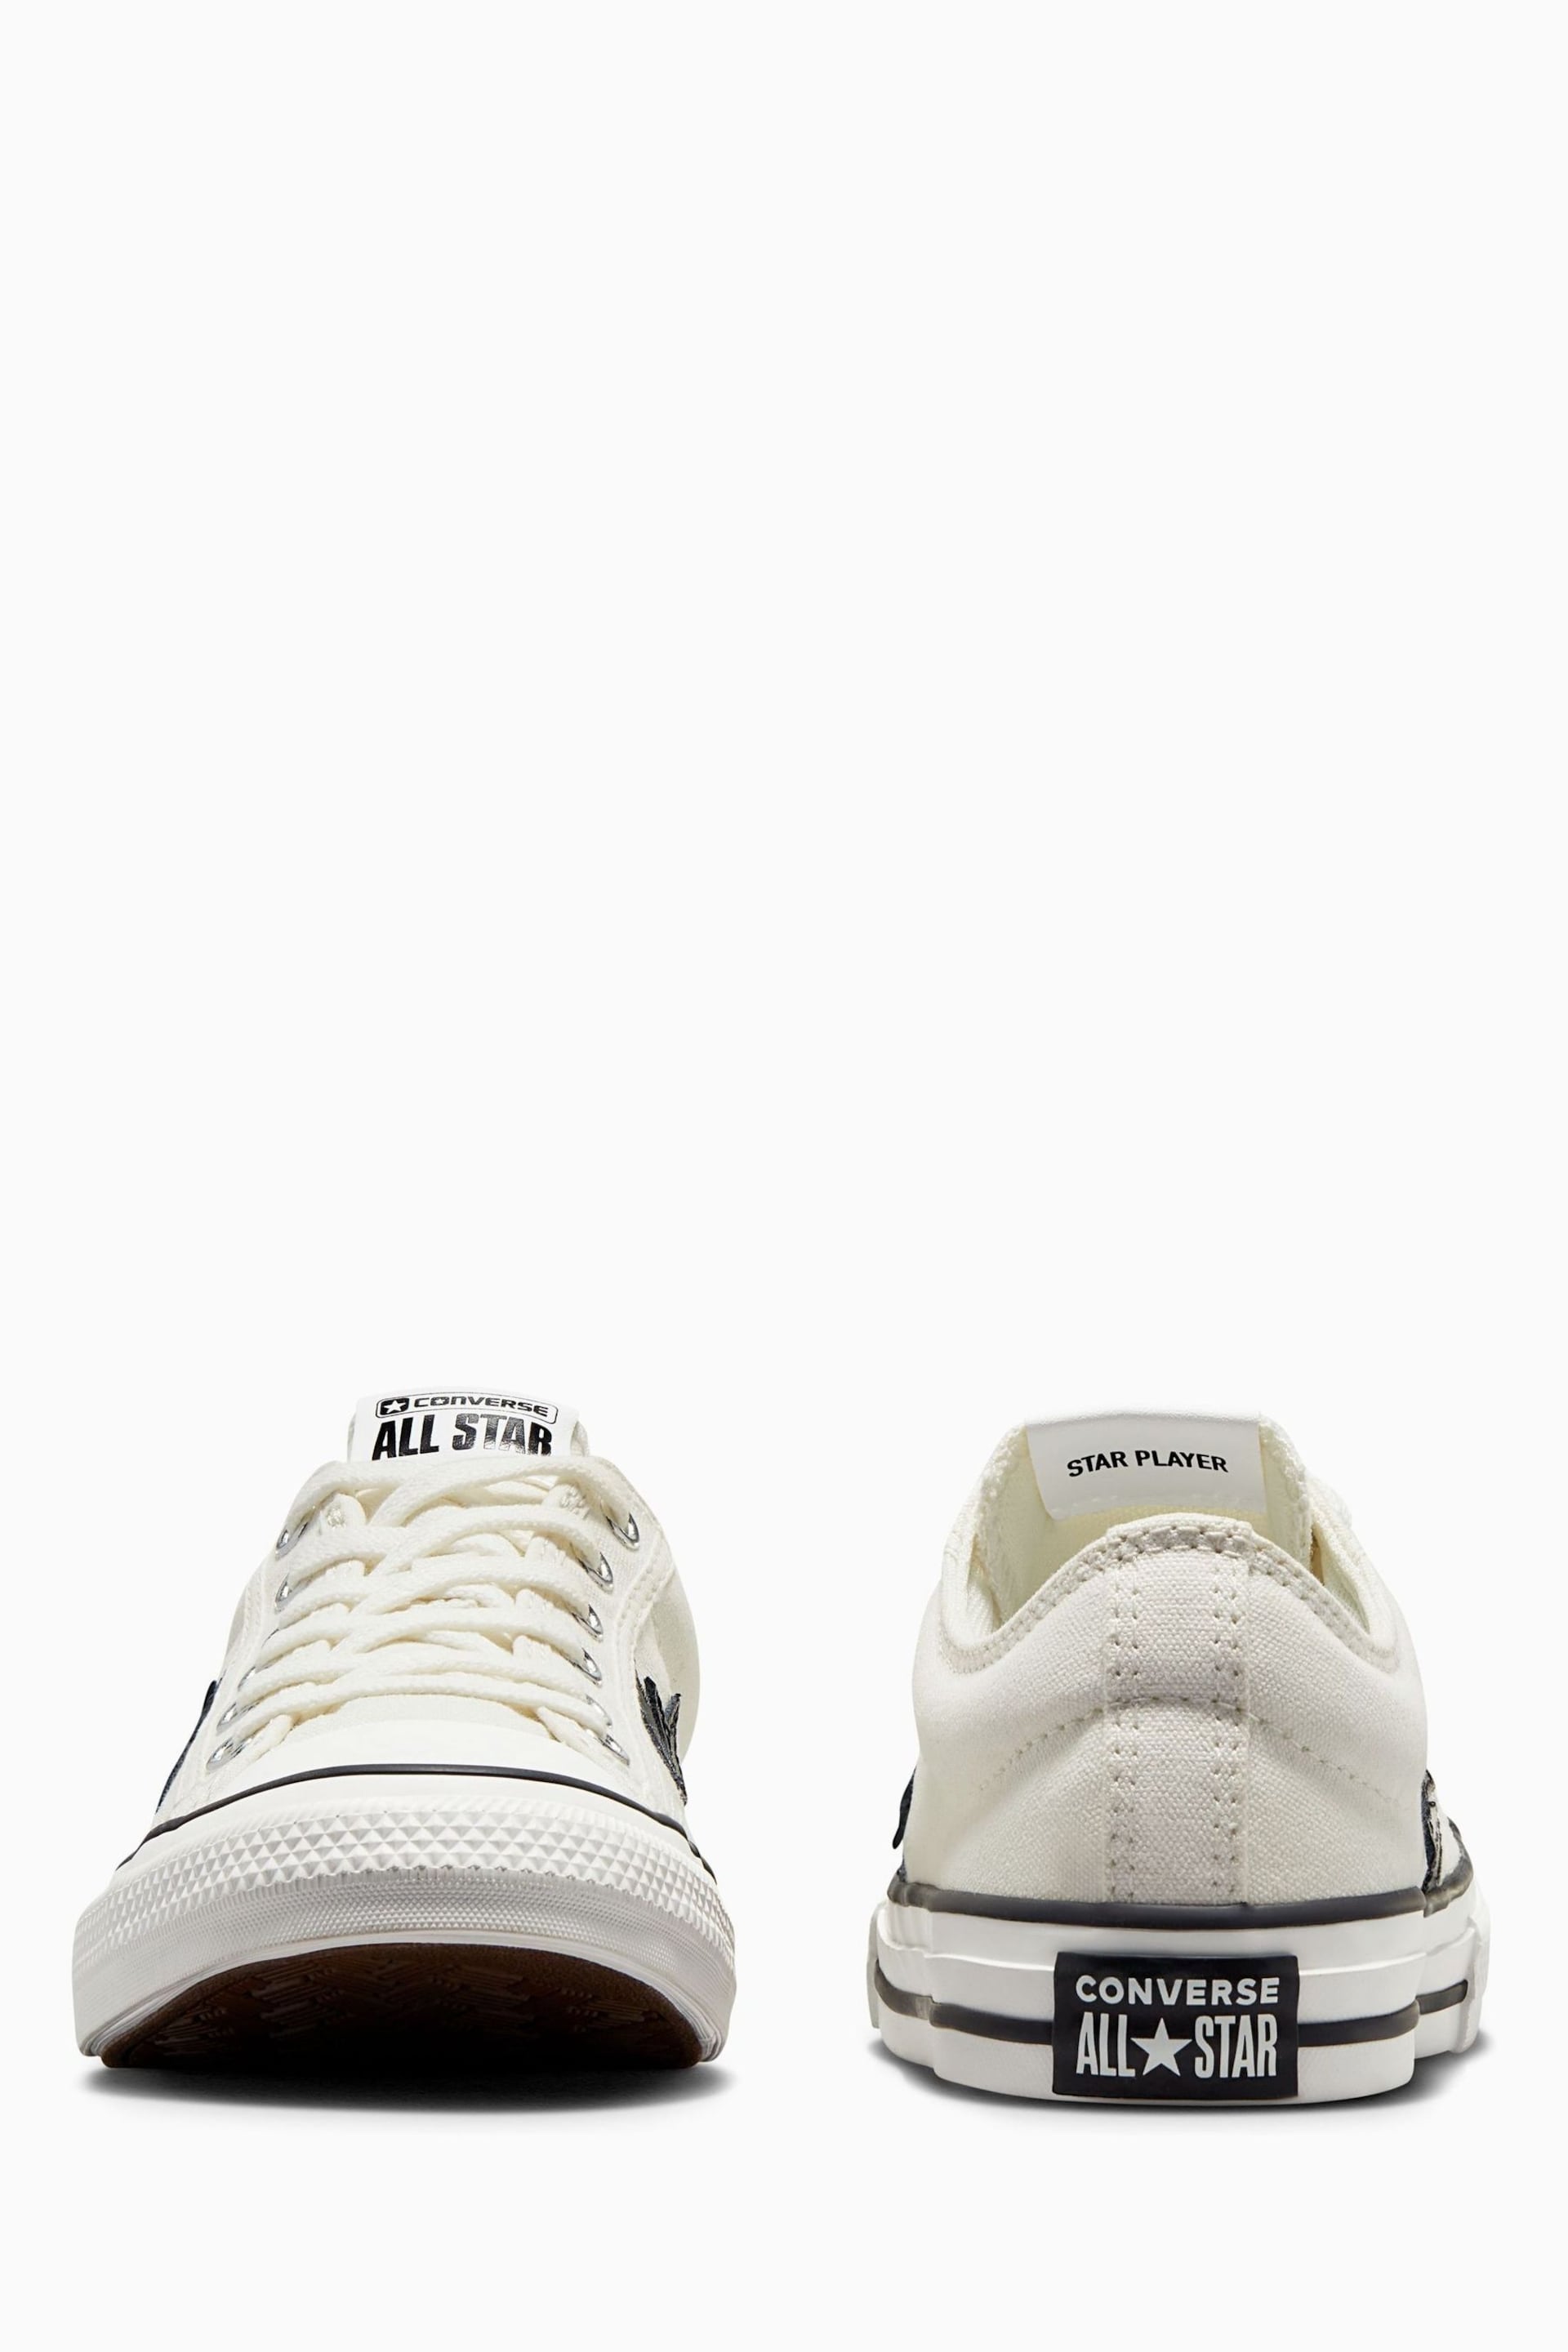 Converse White Youth Star Player 76 Trainers - Image 4 of 7